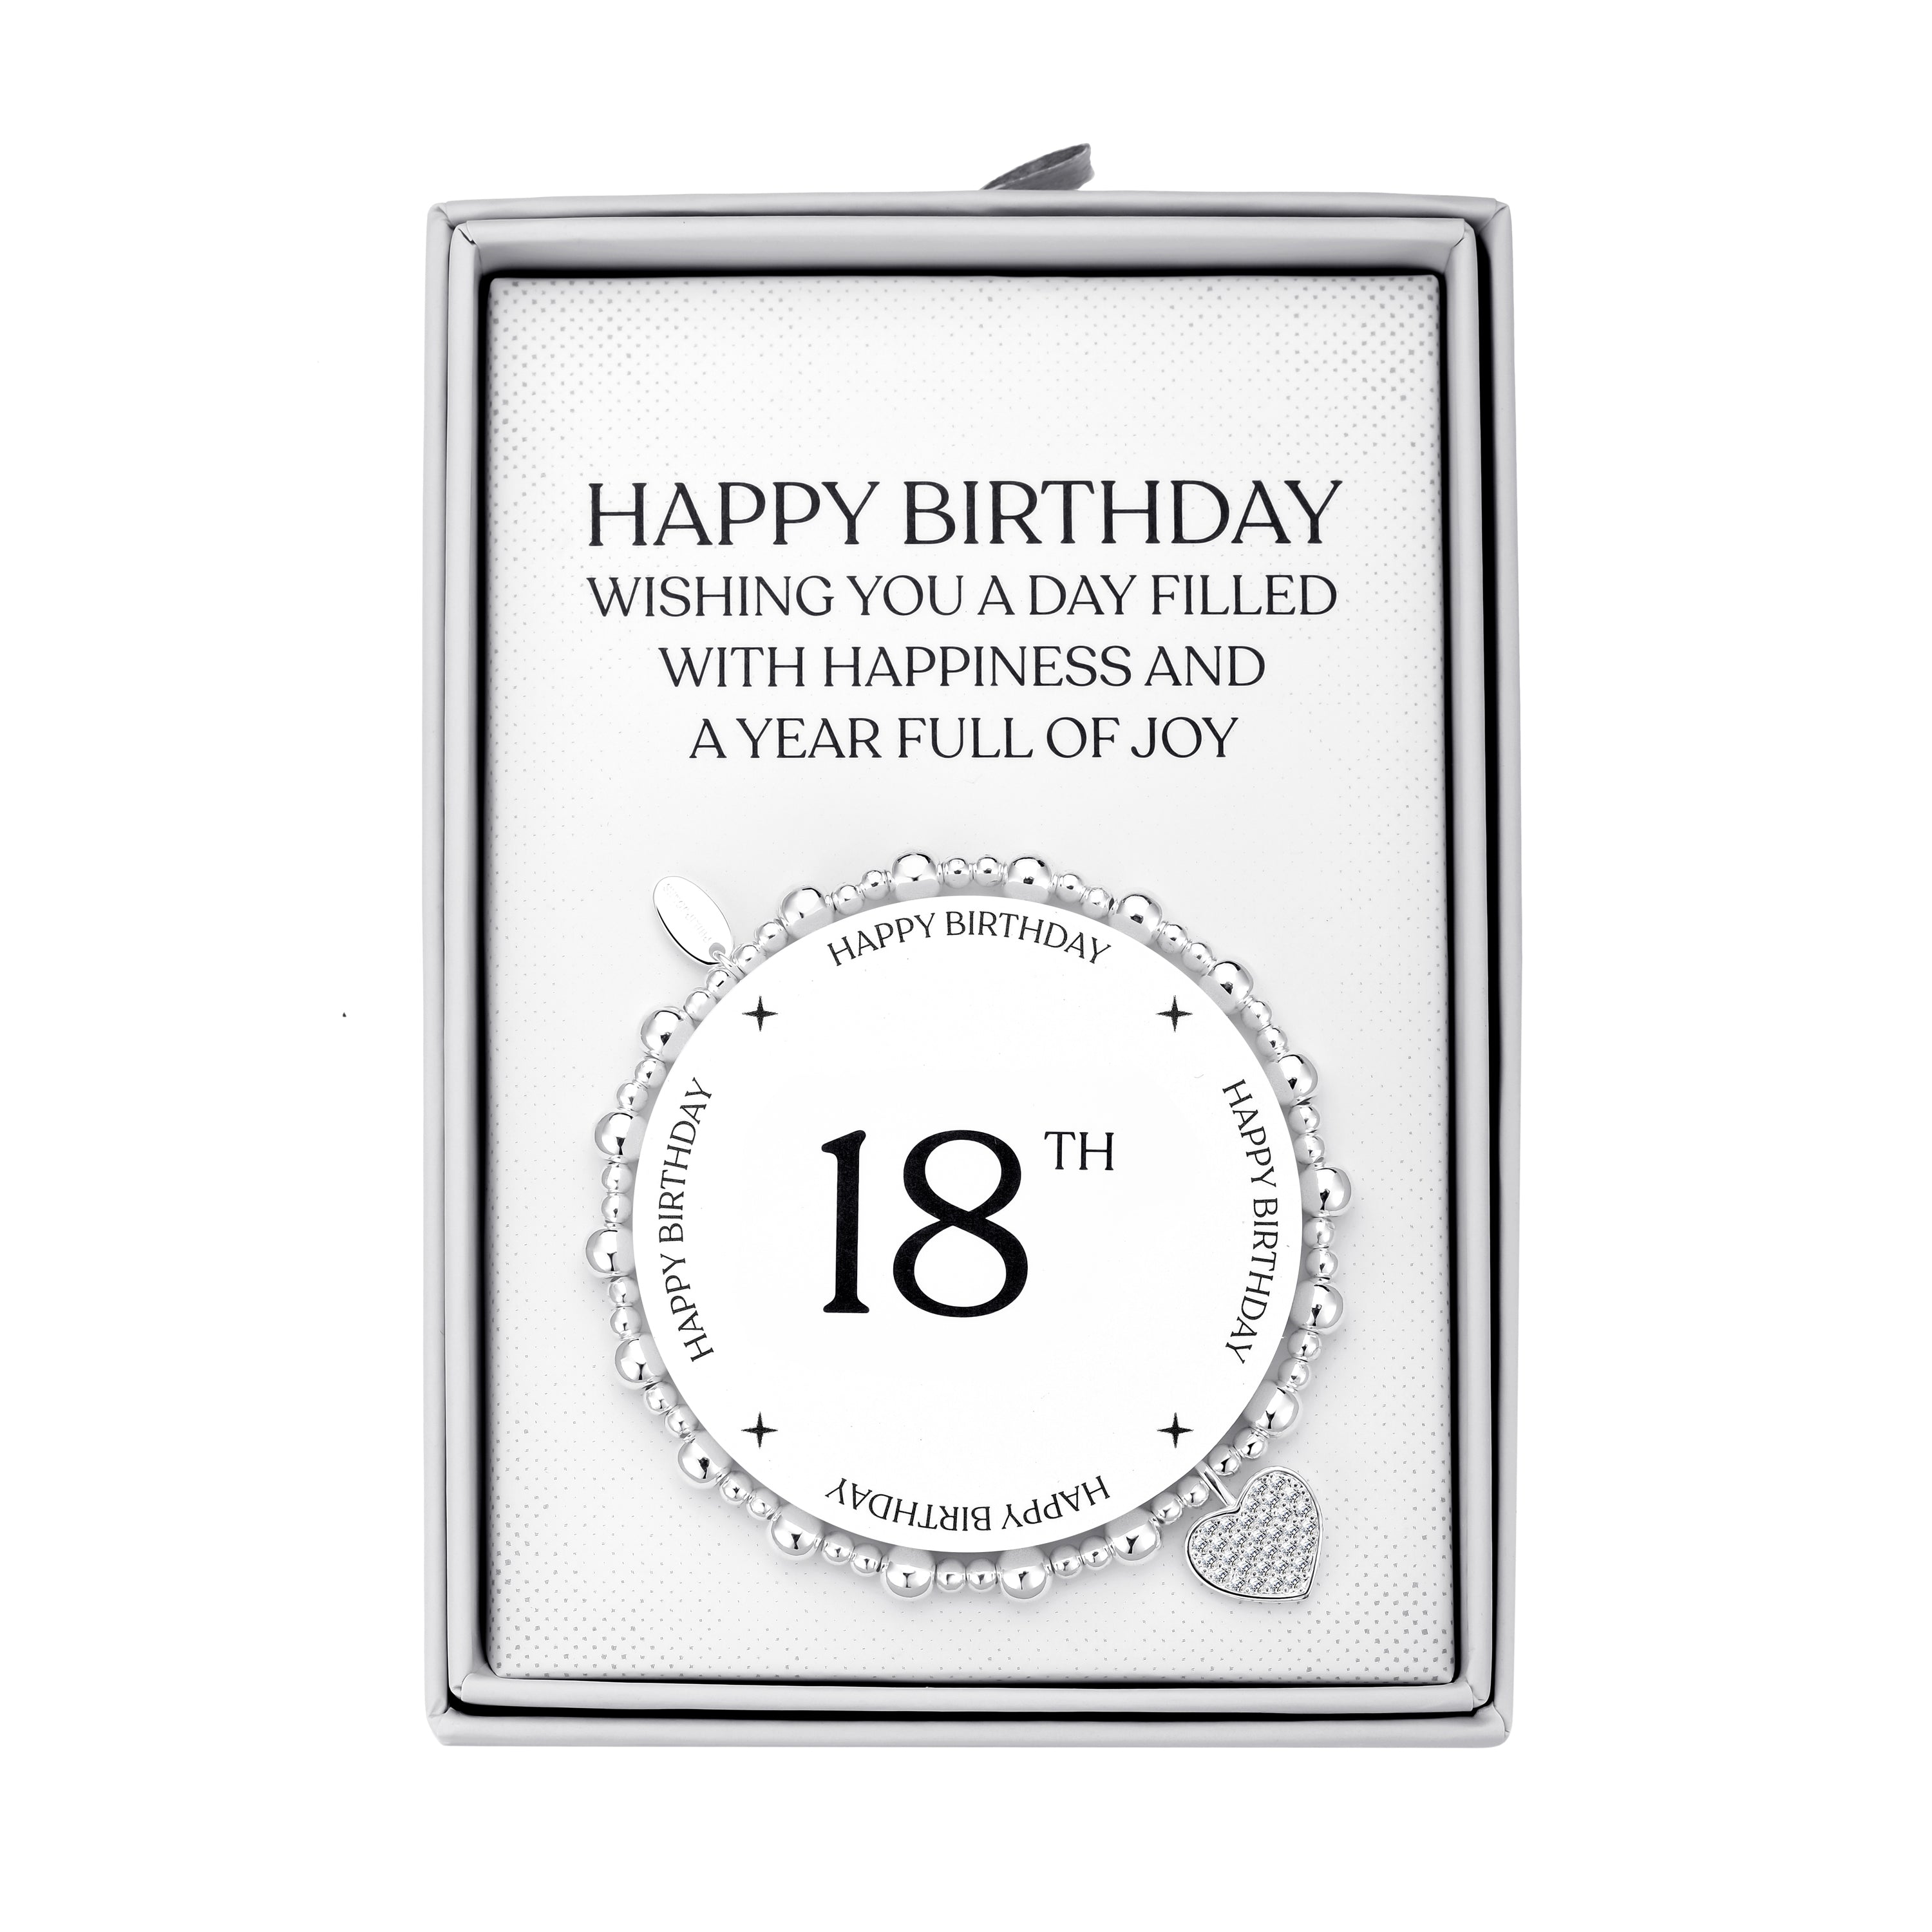 18th Birthday Heart Charm Stretch Bracelet with Quote Gift Box by Philip Jones Jewellery